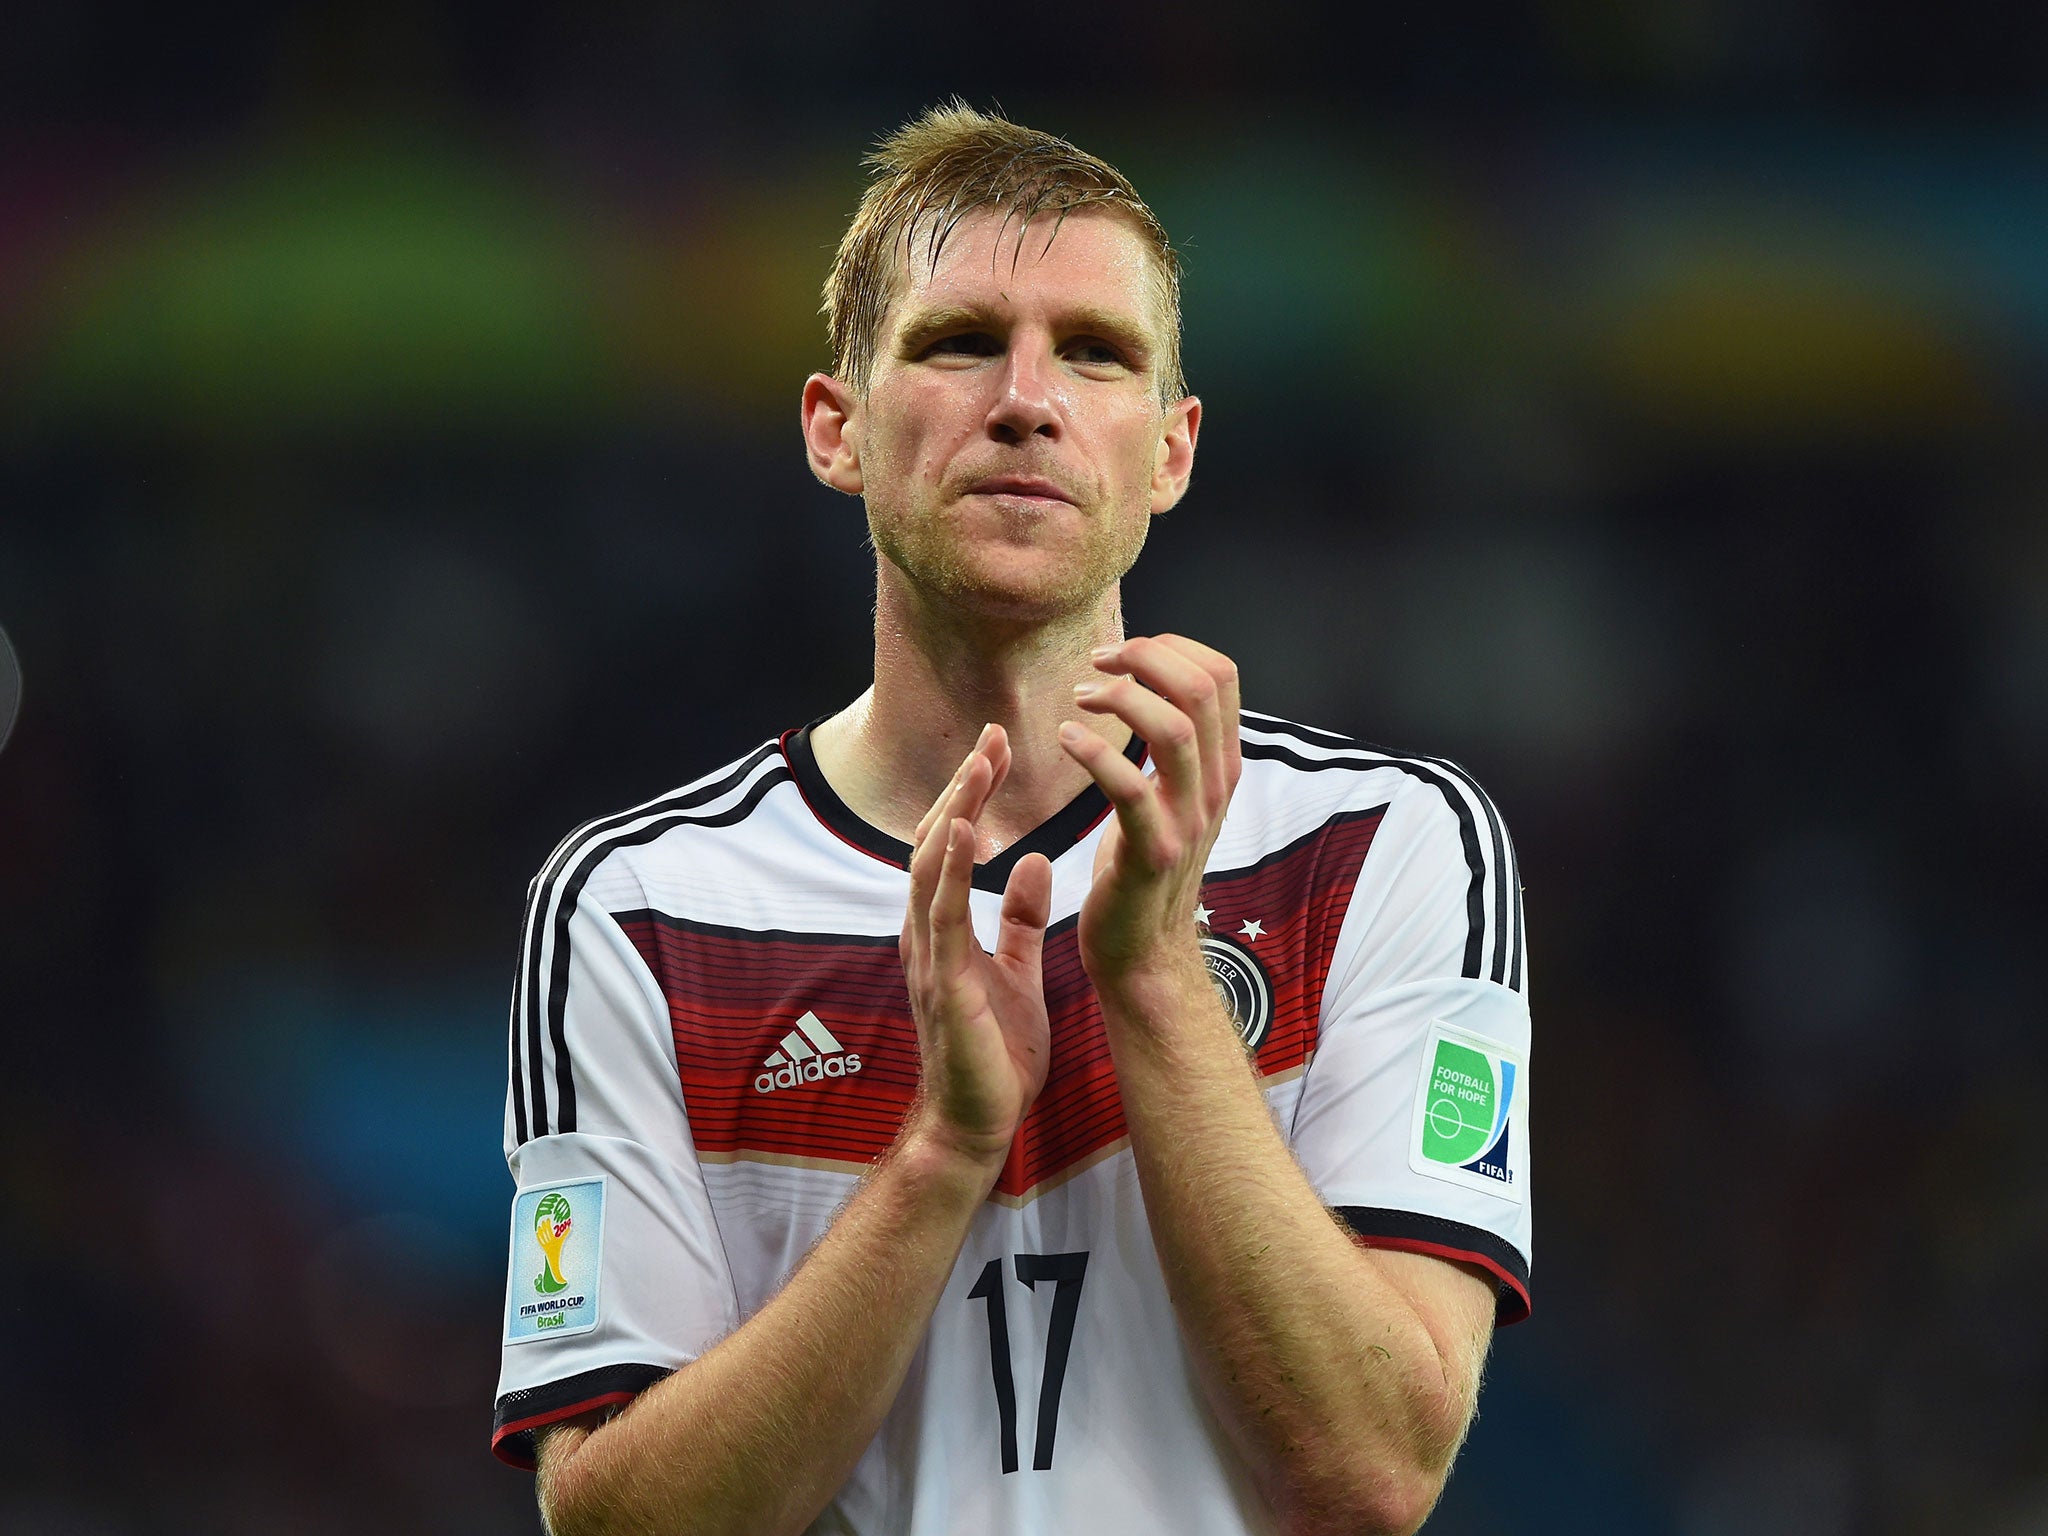 Per Mertesacker pictured during the recent World Cup in Brazil